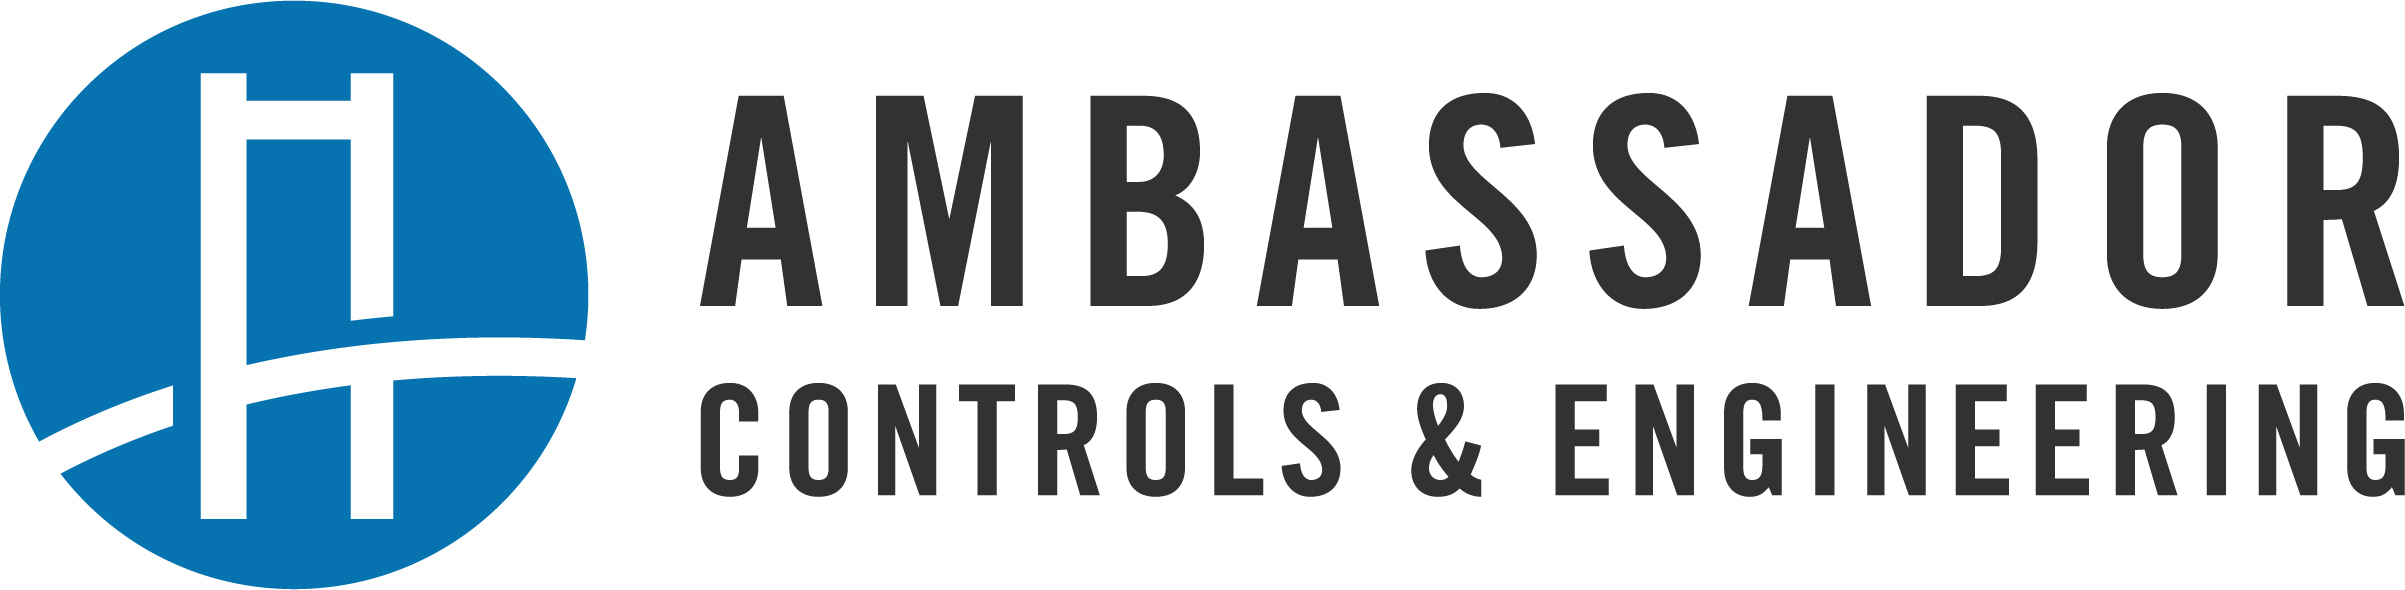 Statement on the Passing of Laura Thomas, Founder and President of Ambassador Controls and Engineering